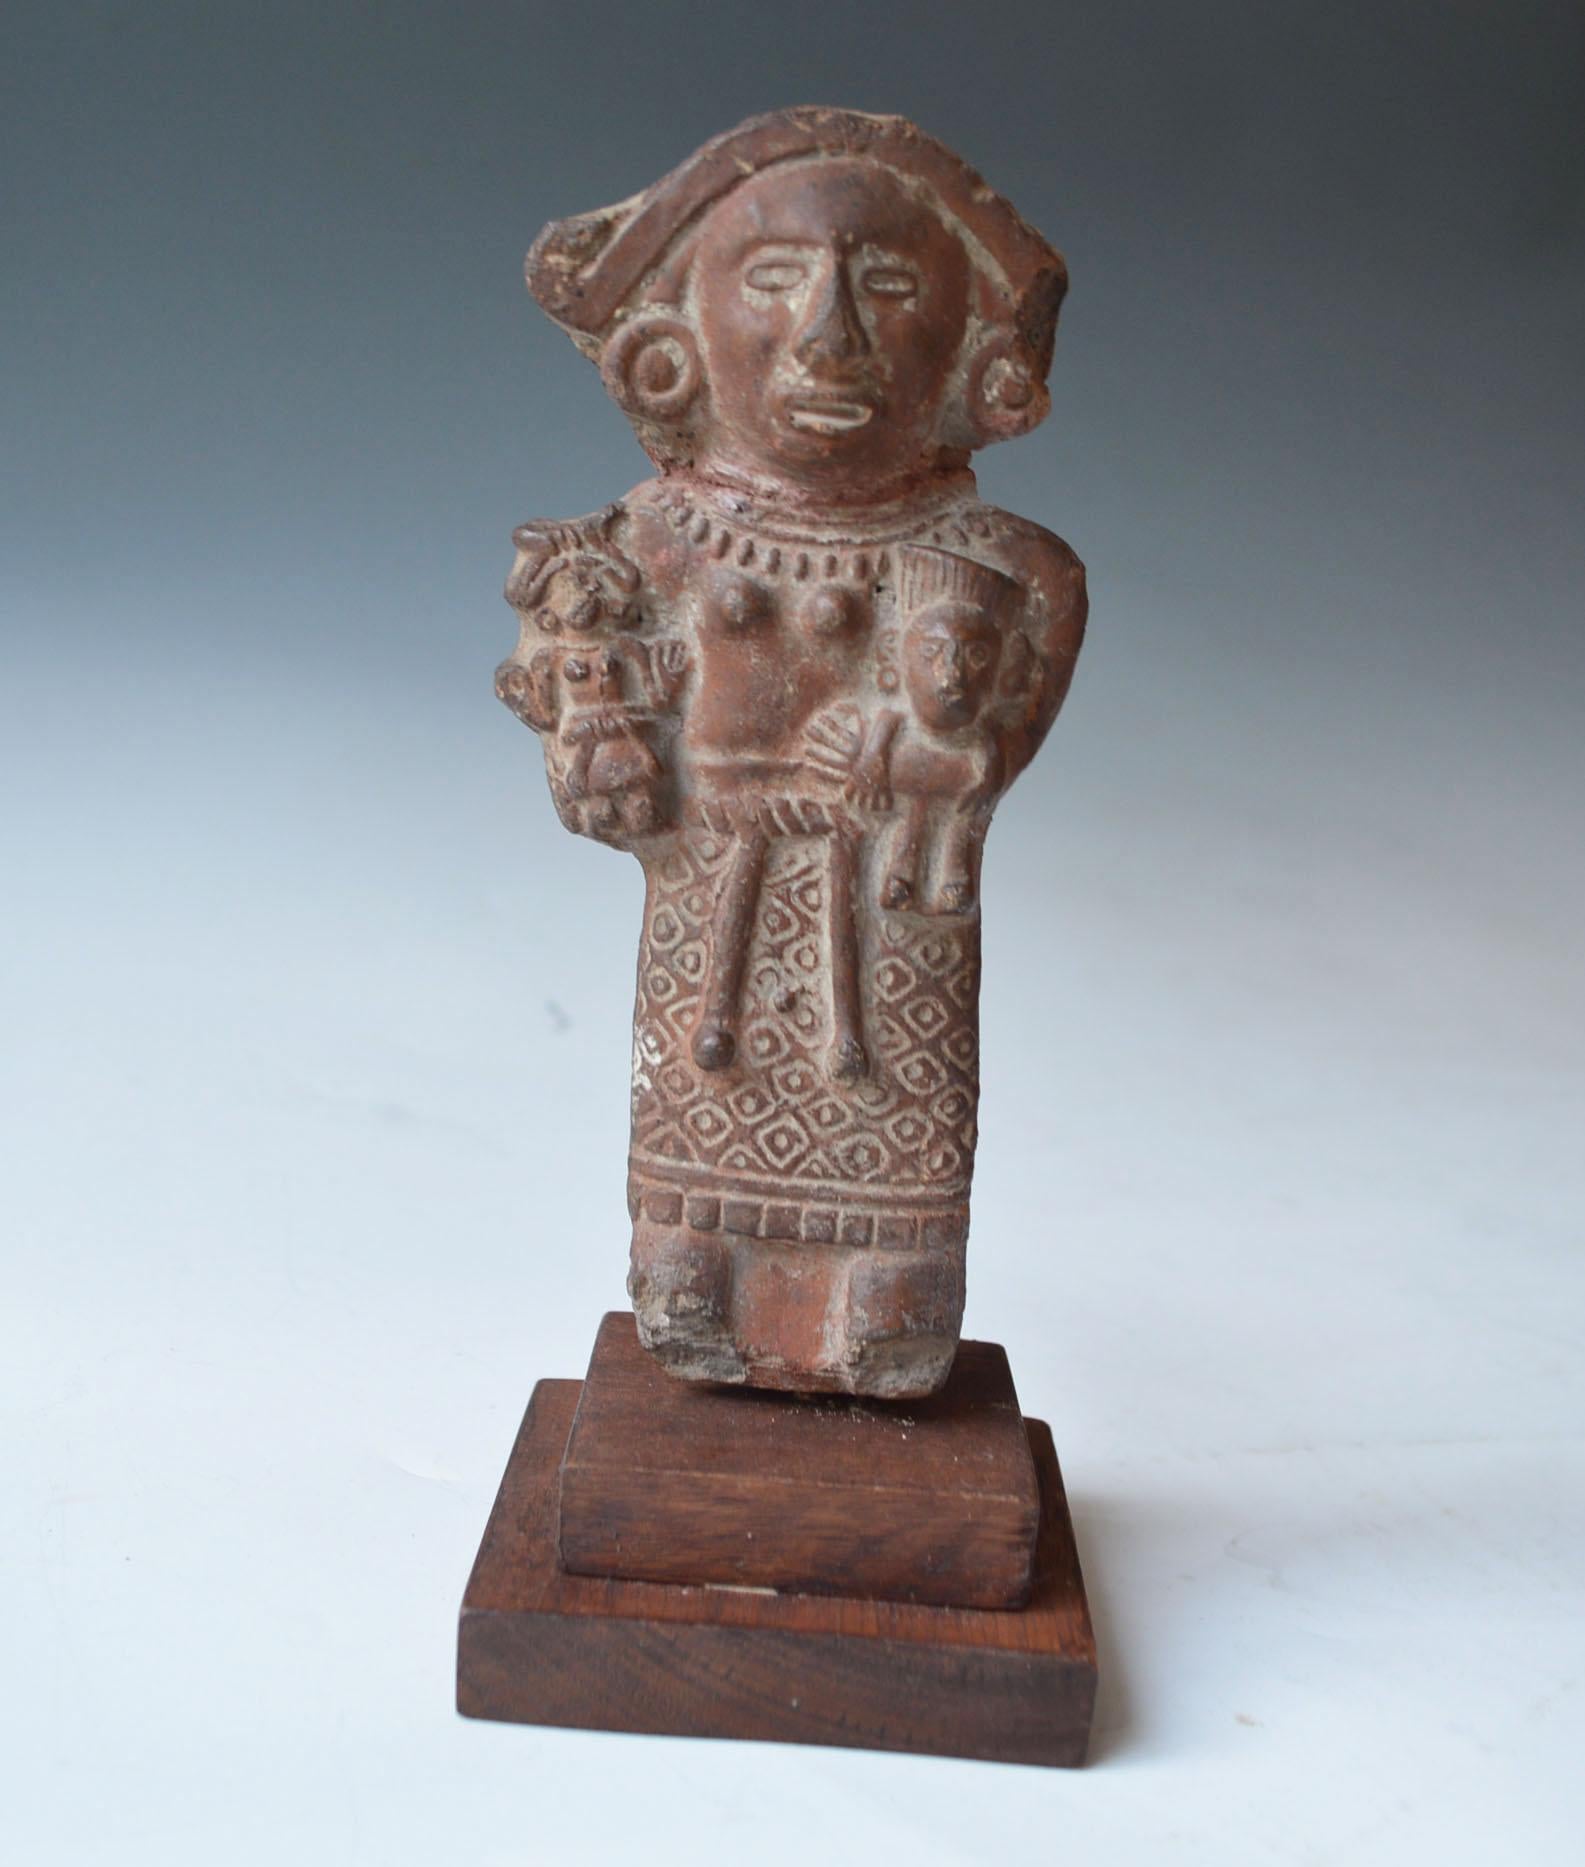 Pre Columbian Aztec Rattle figure Cihuacóatl Aztec CA. A.D. 1300-1521

A rattle figure in the form of the fertility goddess Cihuacoatl
The female figure with finely modeled design standing with open mouthed holding two children

Old Collection